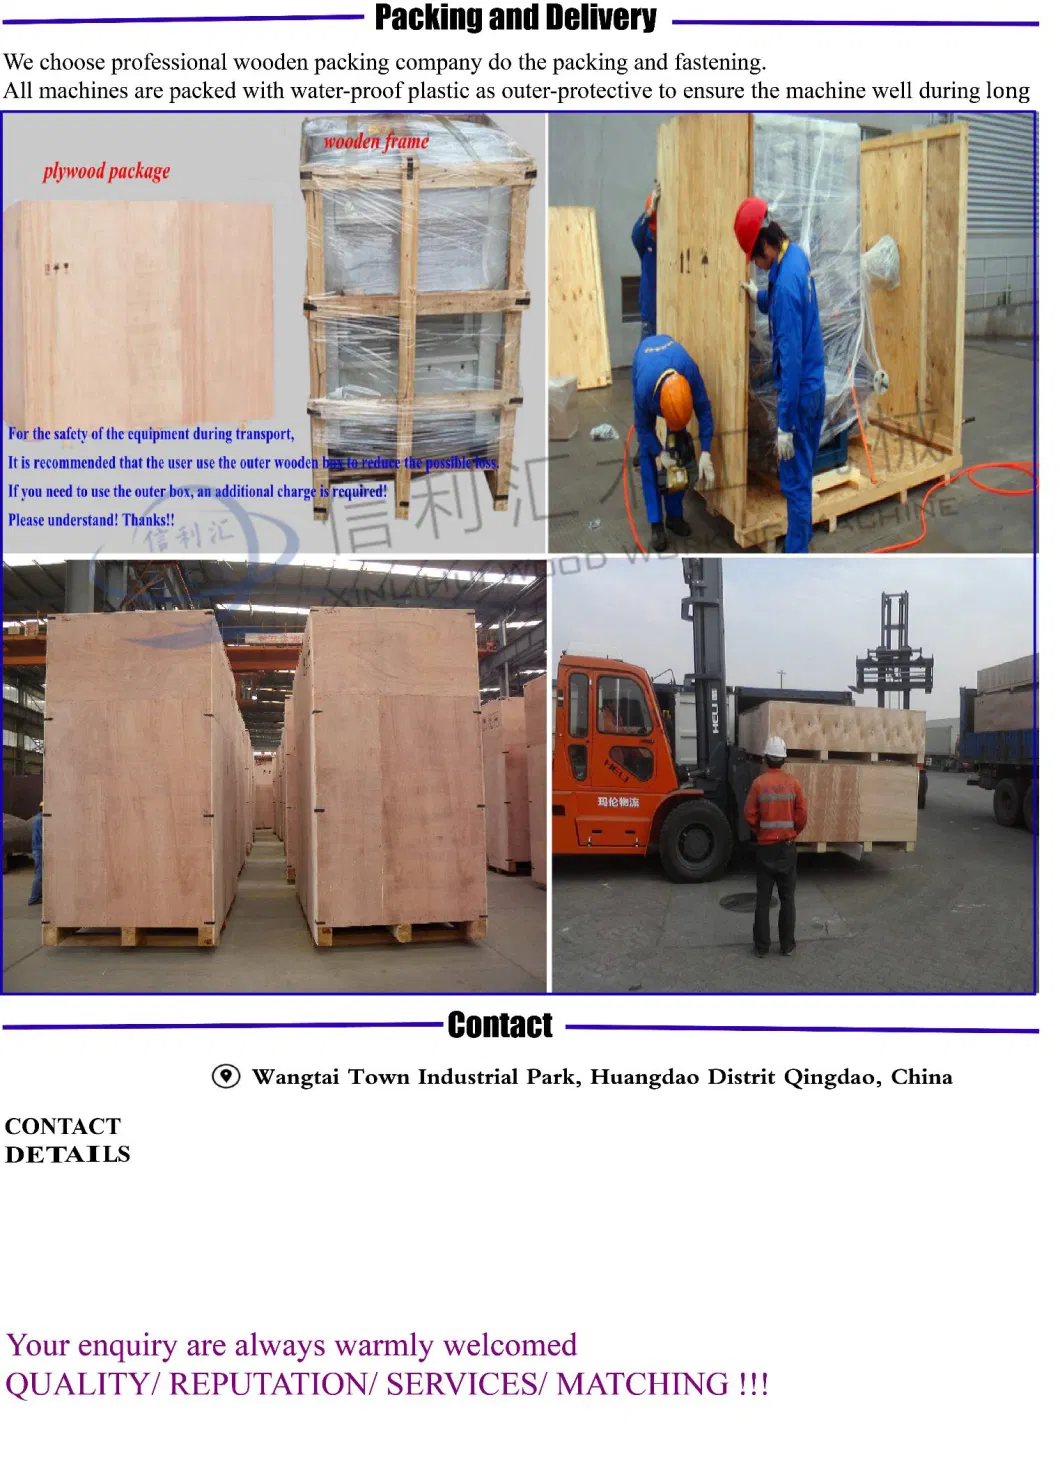 Special Machine Tool for Cutting The Square L or Long Raft at The Joint of Wooden Parts. It Is an Ideal Tool for The Wood Processing Industry